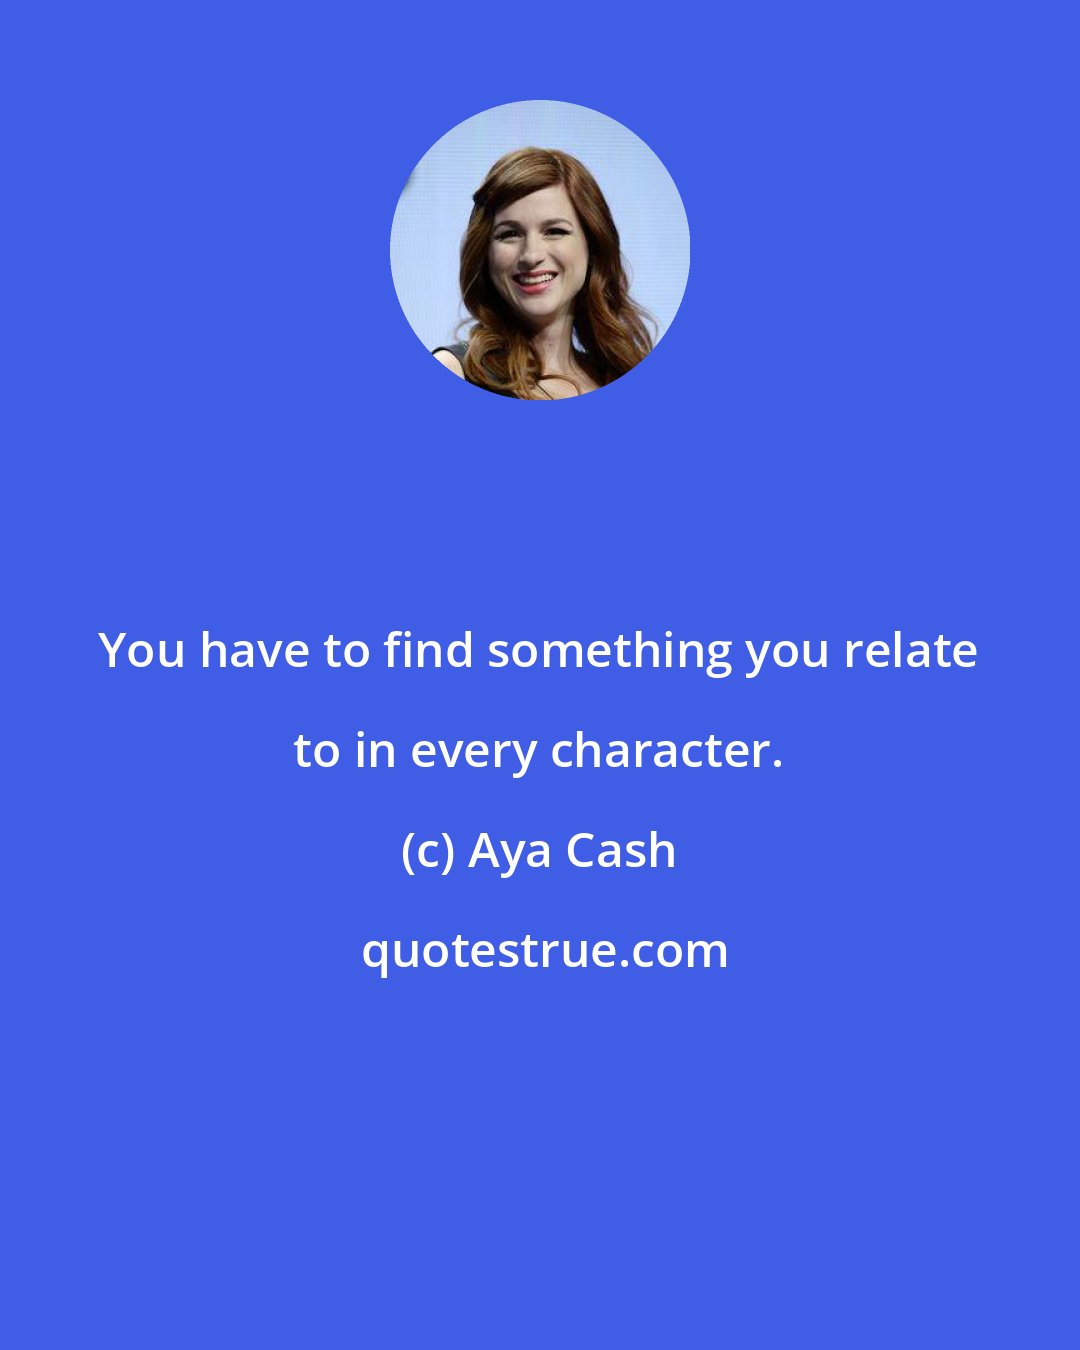 Aya Cash: You have to find something you relate to in every character.